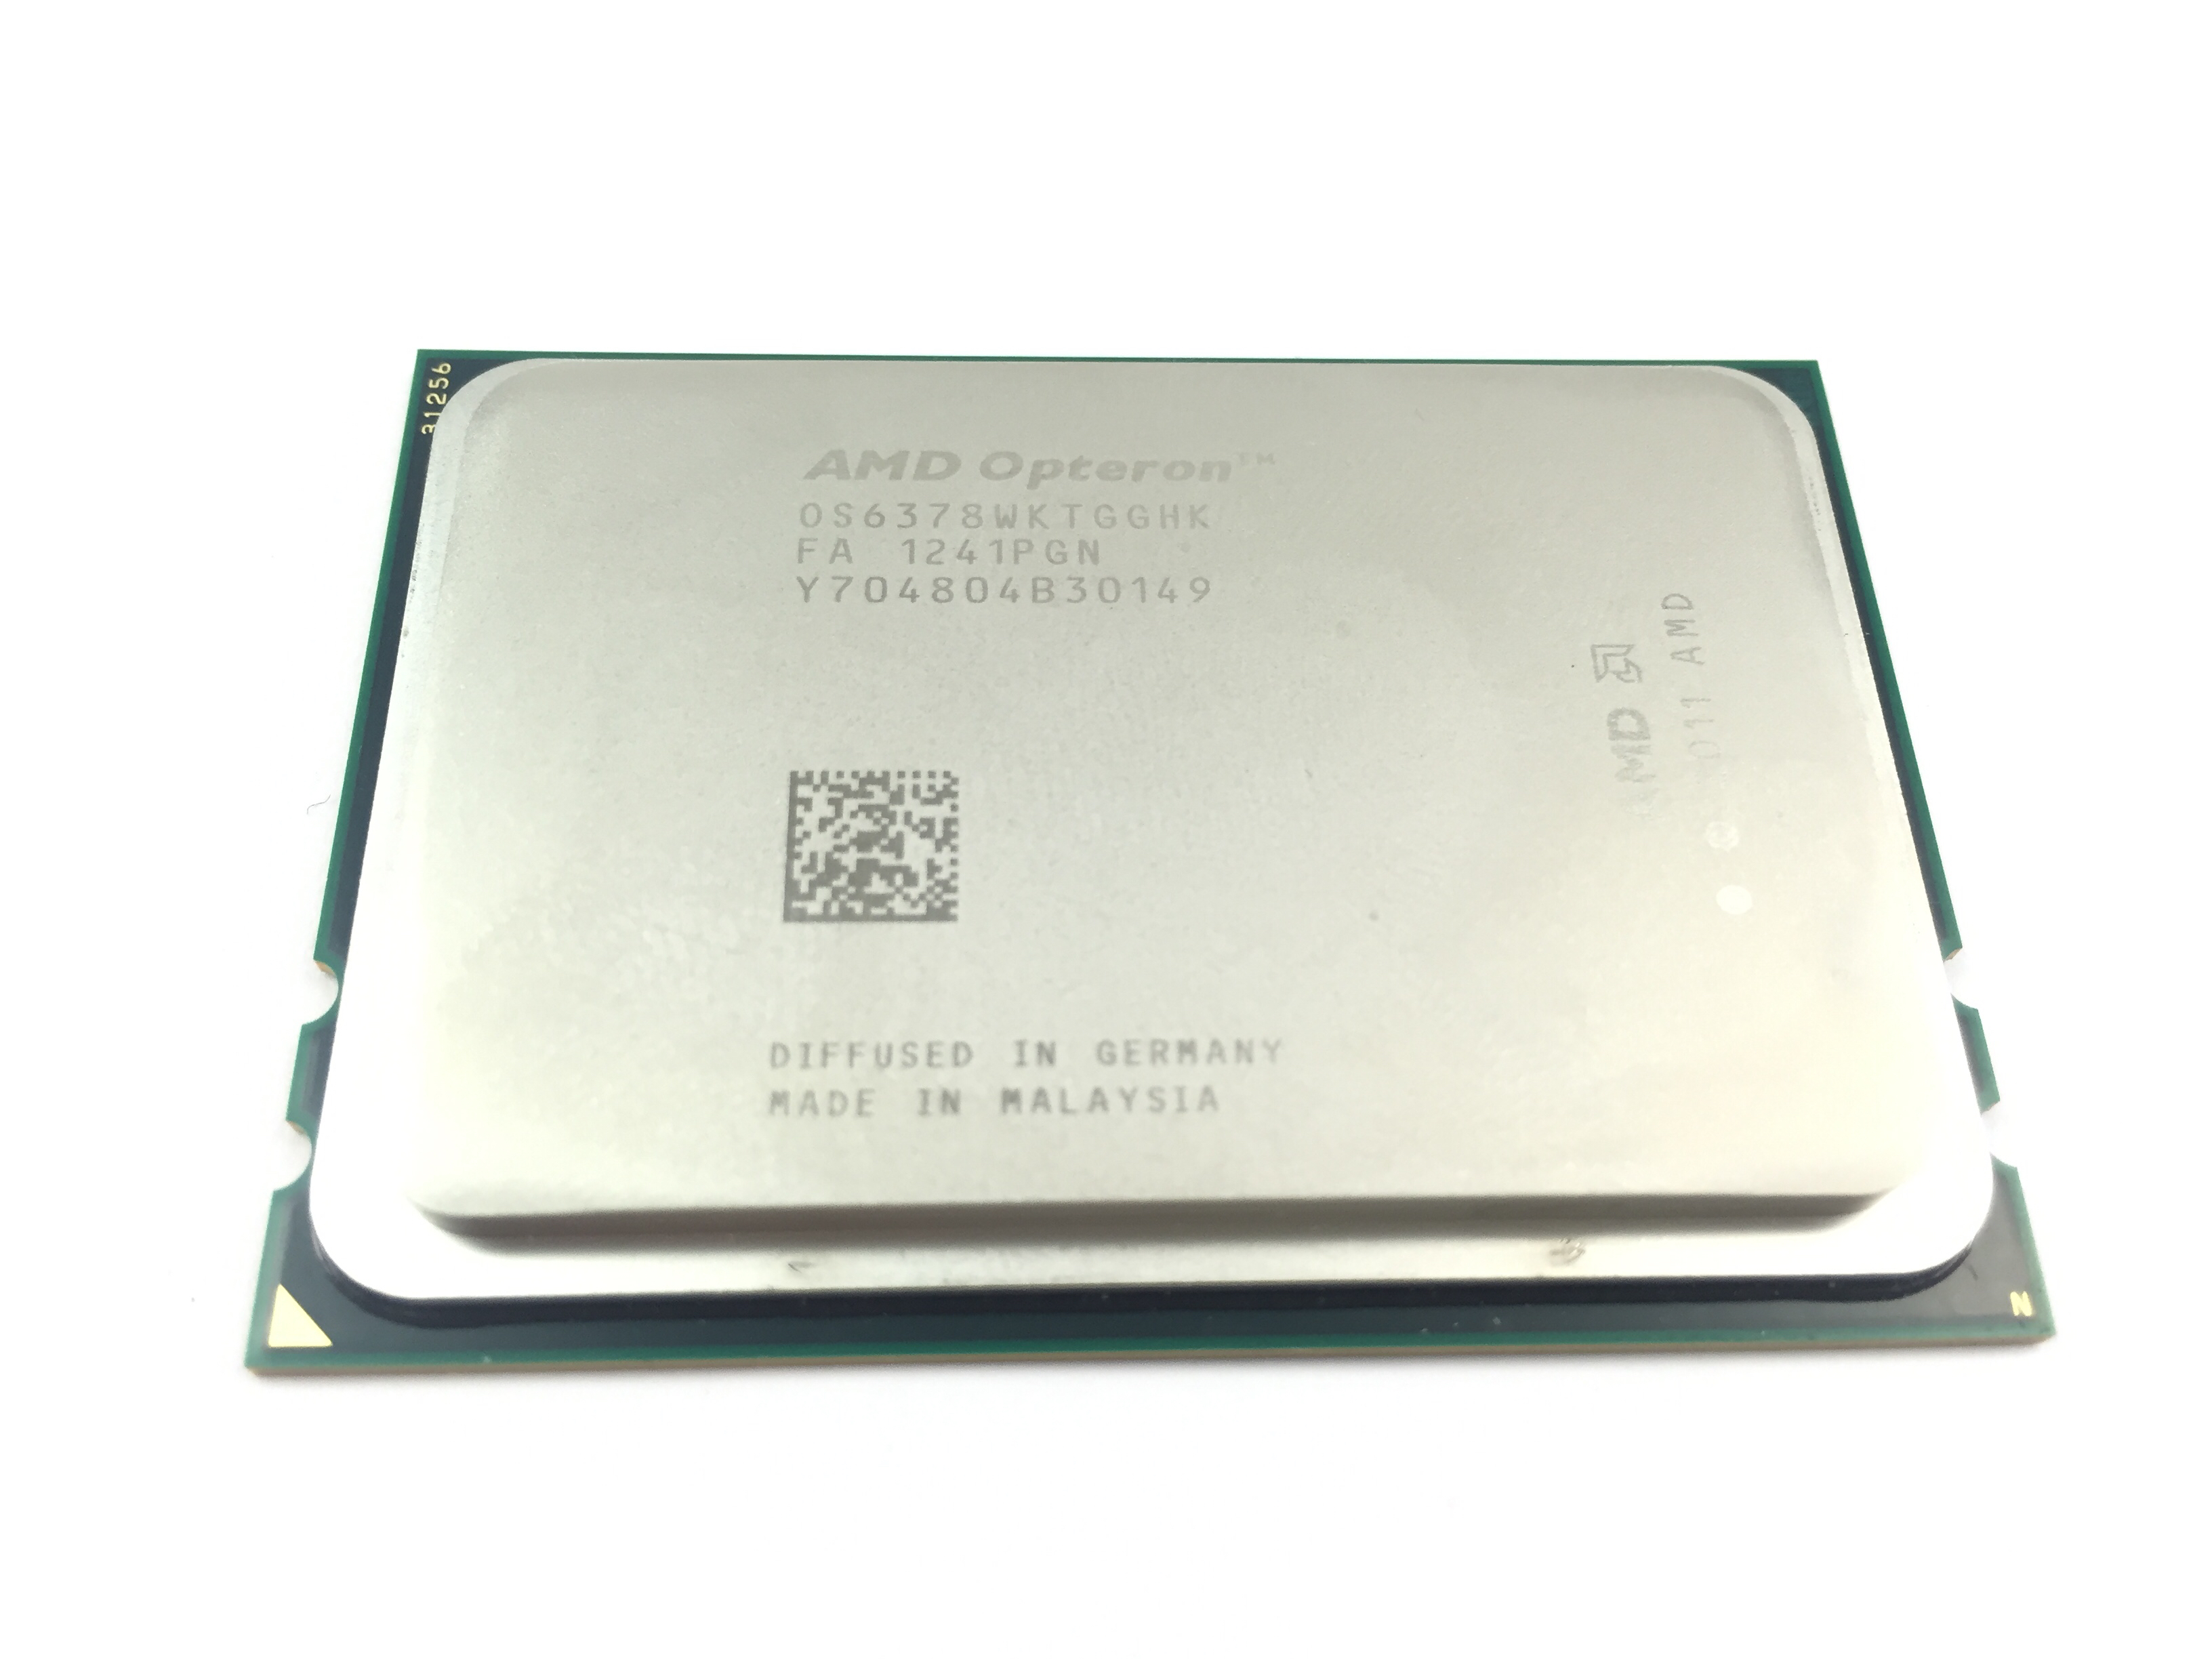 AMD Opteron 6378 2.4GHz 16-Core 16MB L3 Cache Socket G34 Processor (OS6378WKTGGHK)